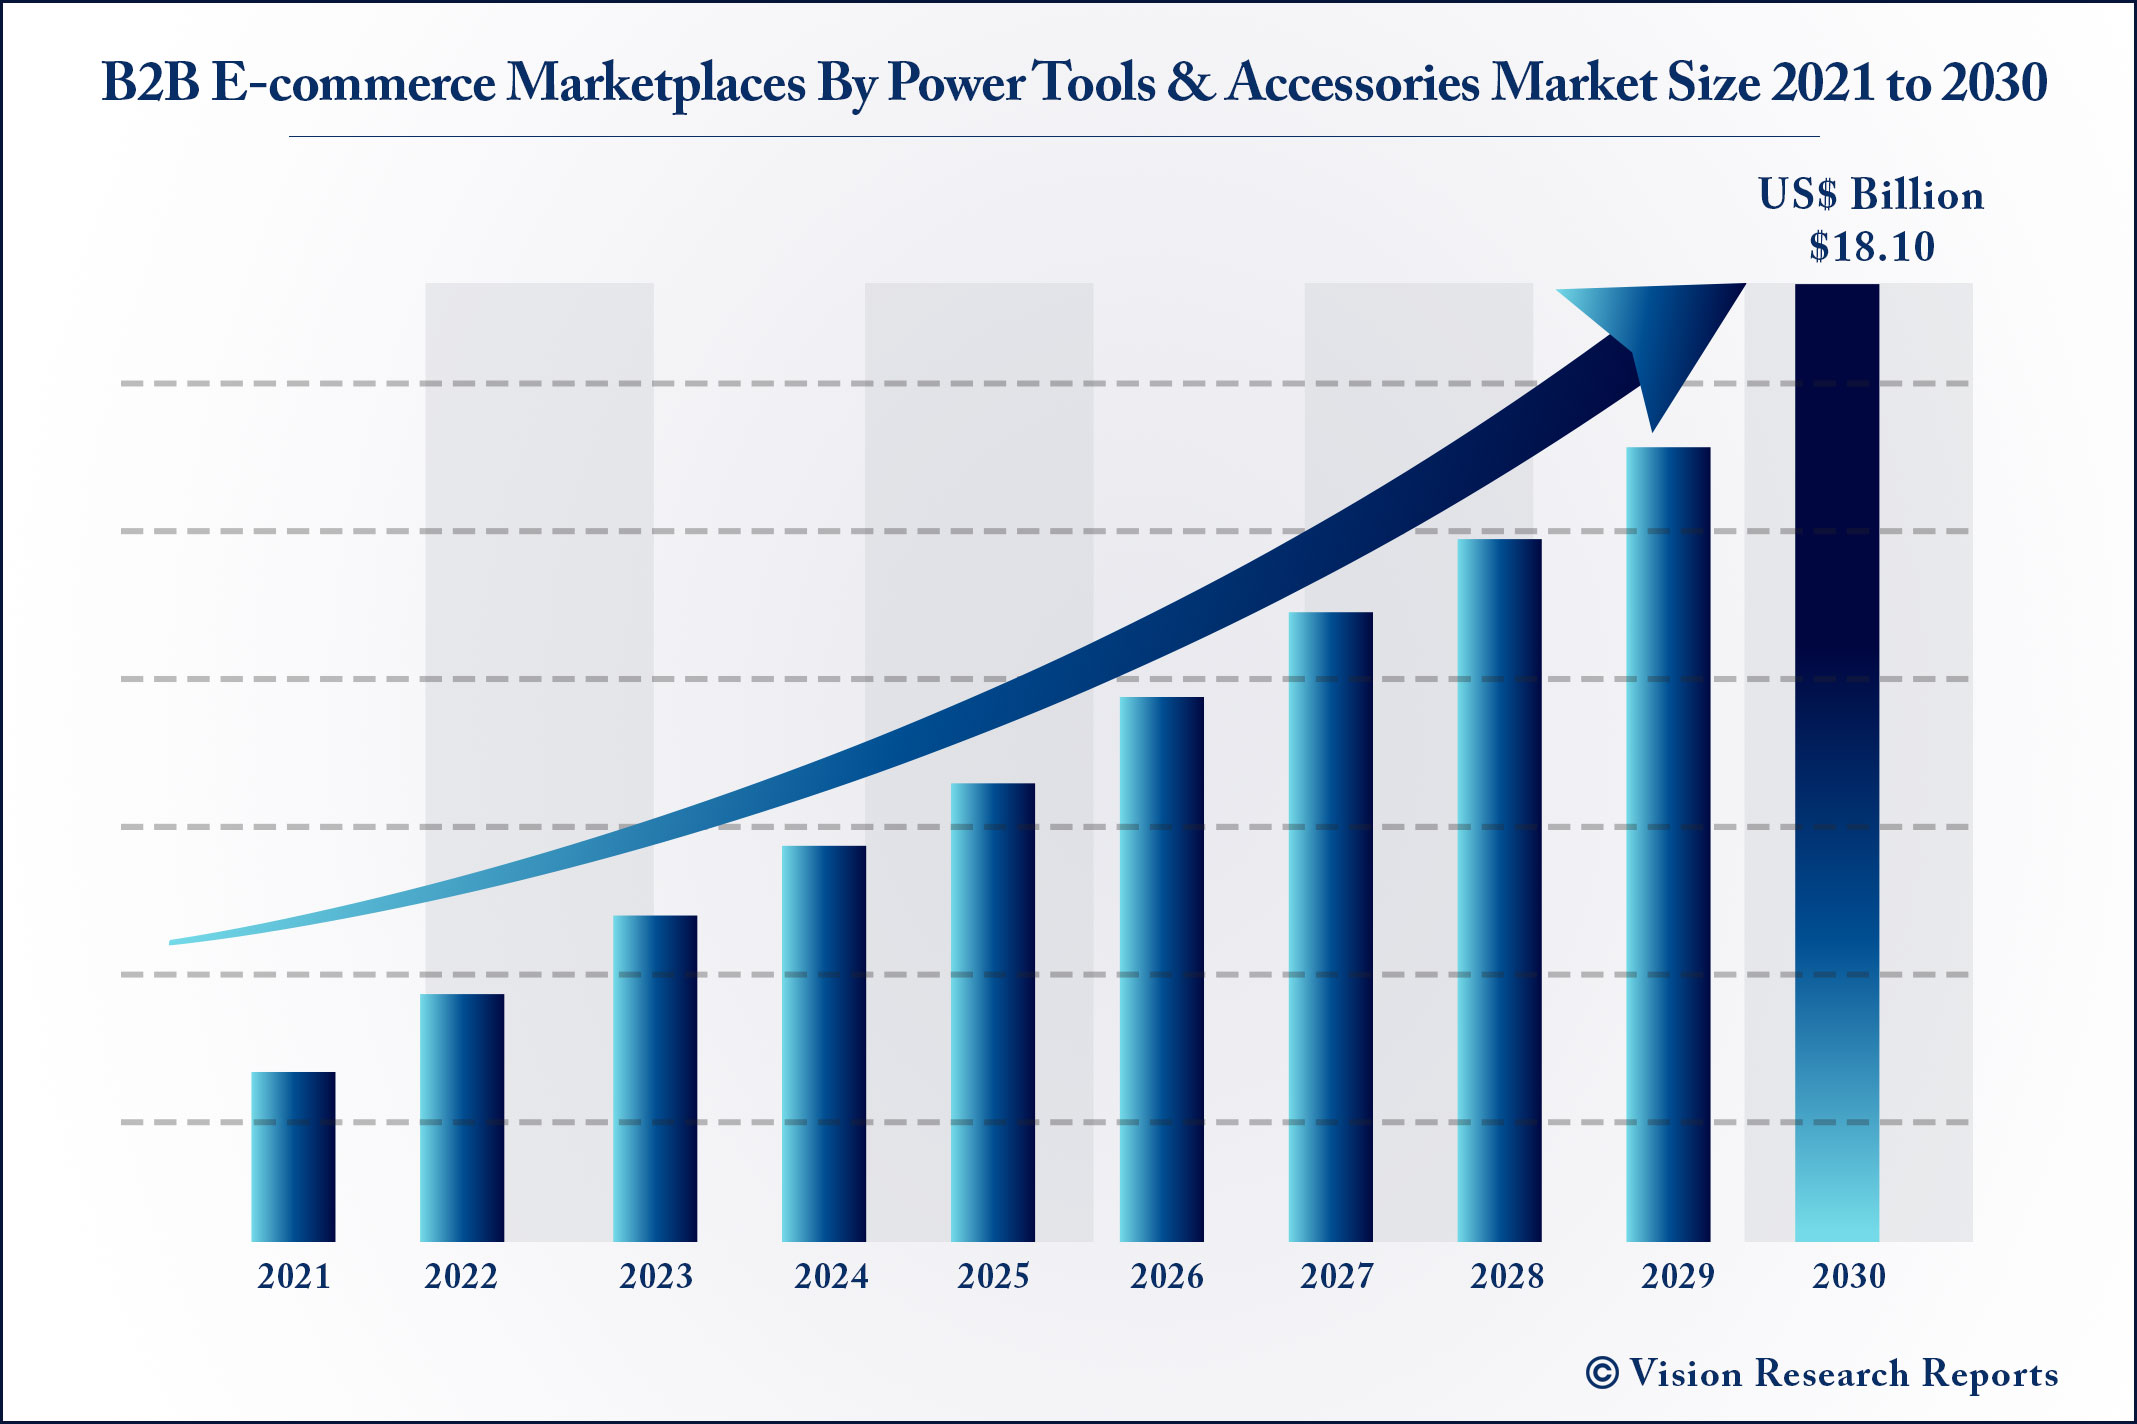 B2B E-commerce Marketplaces By Power Tools & Accessories Market Size 2021 to 2030